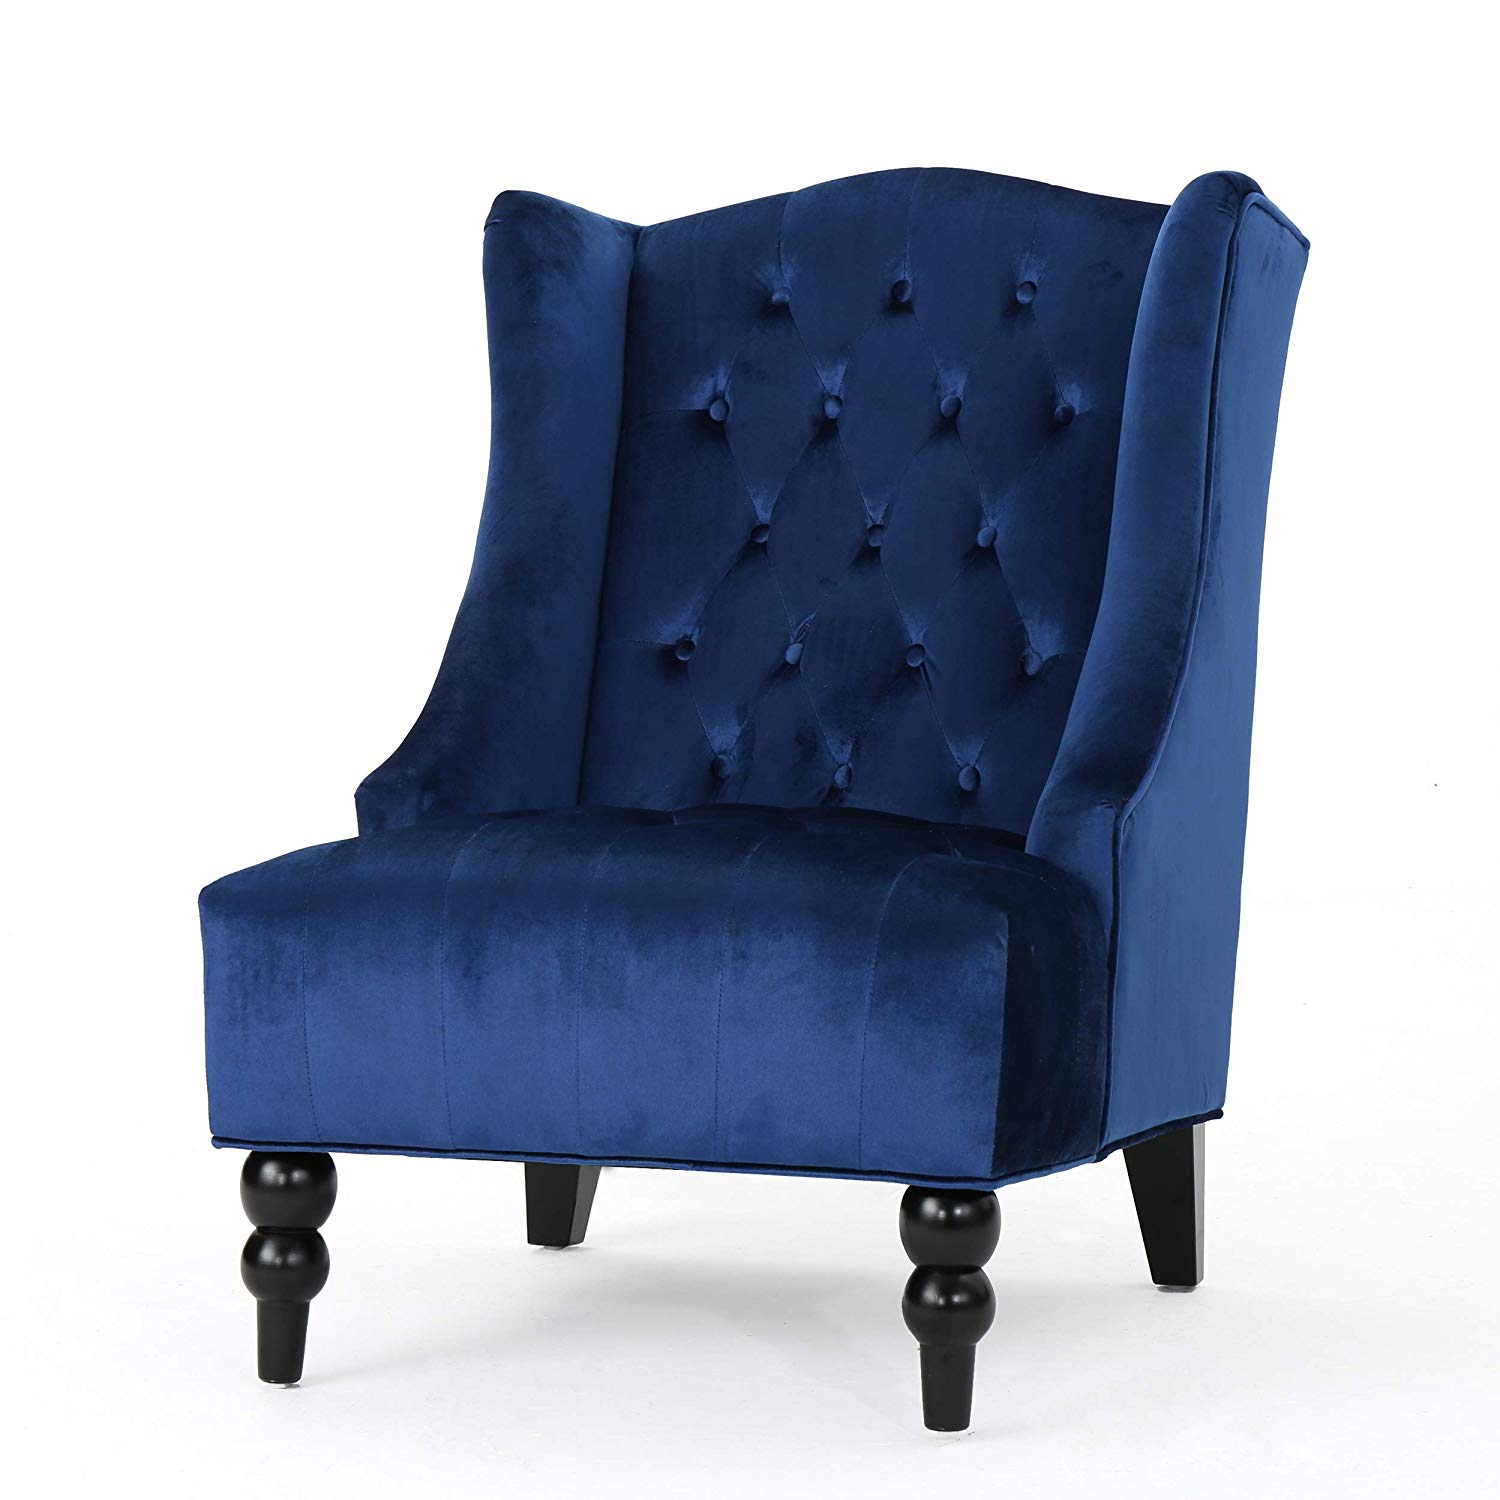 tall wingback tufted velvet accent chair vintage club round pedestal table seat for living room navy blue kitchen dining wicker furniture set clearance console with wine rack